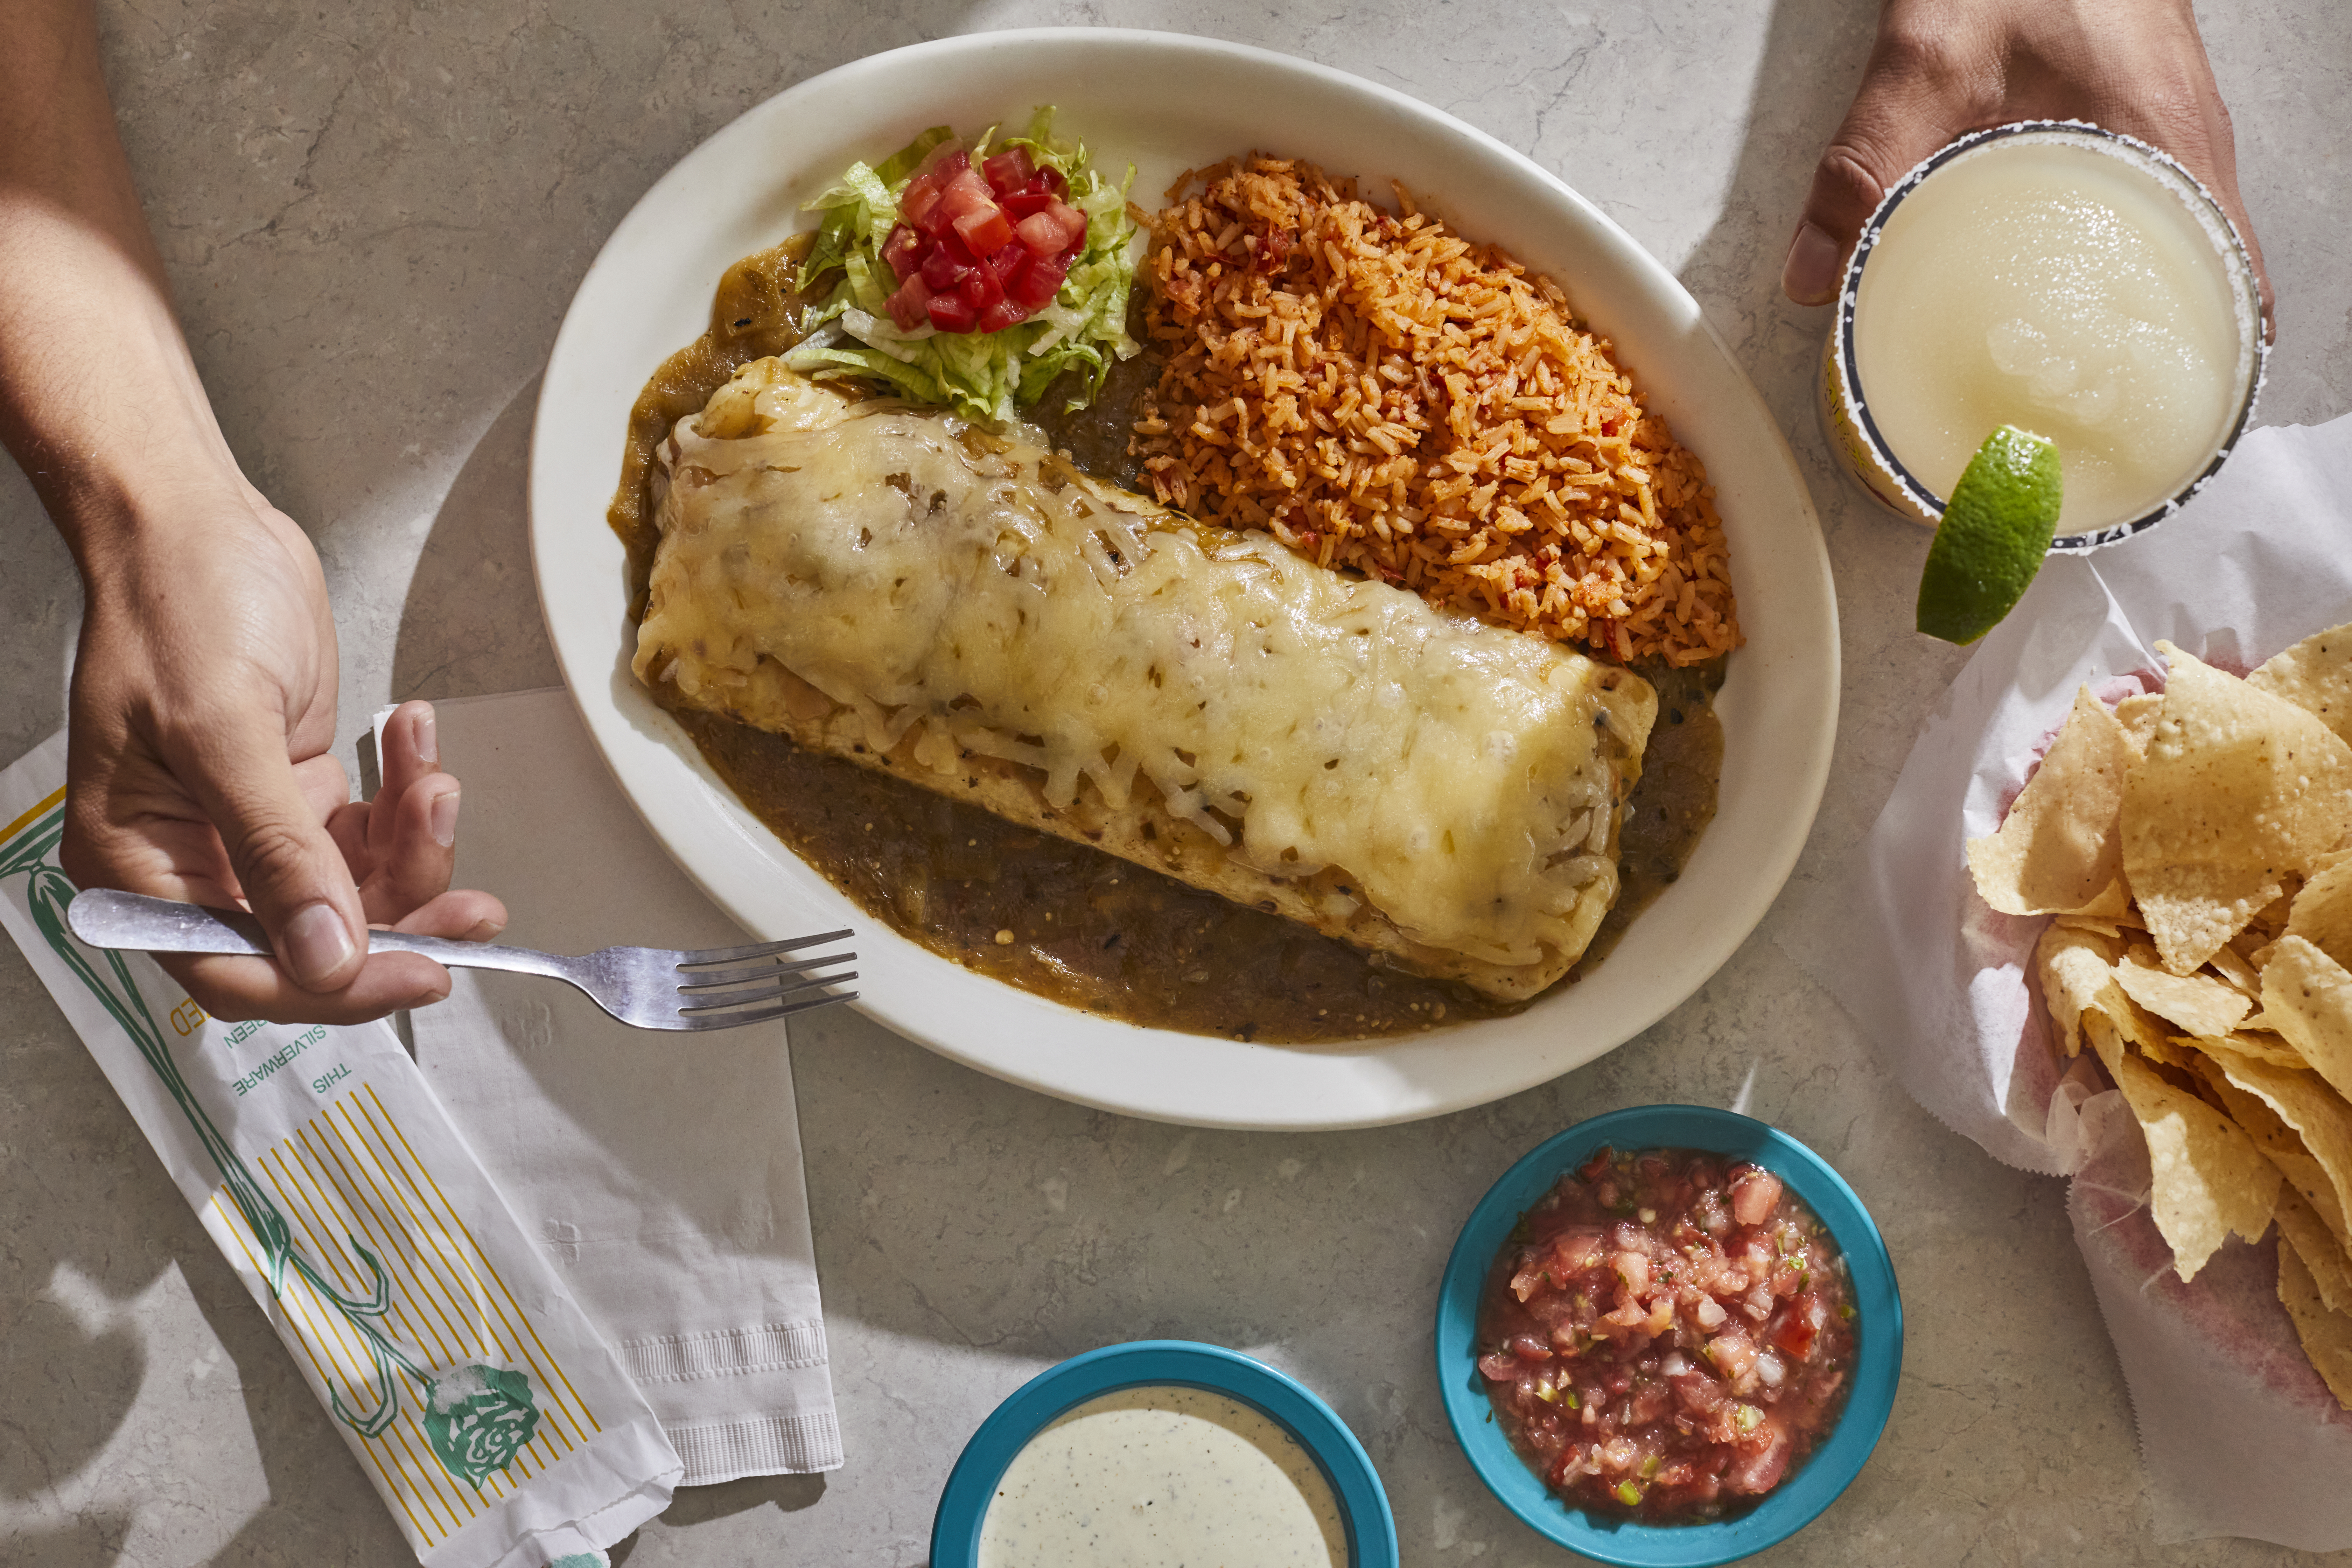 A plate of a burrito smothered in cheese with rice and guacamole.